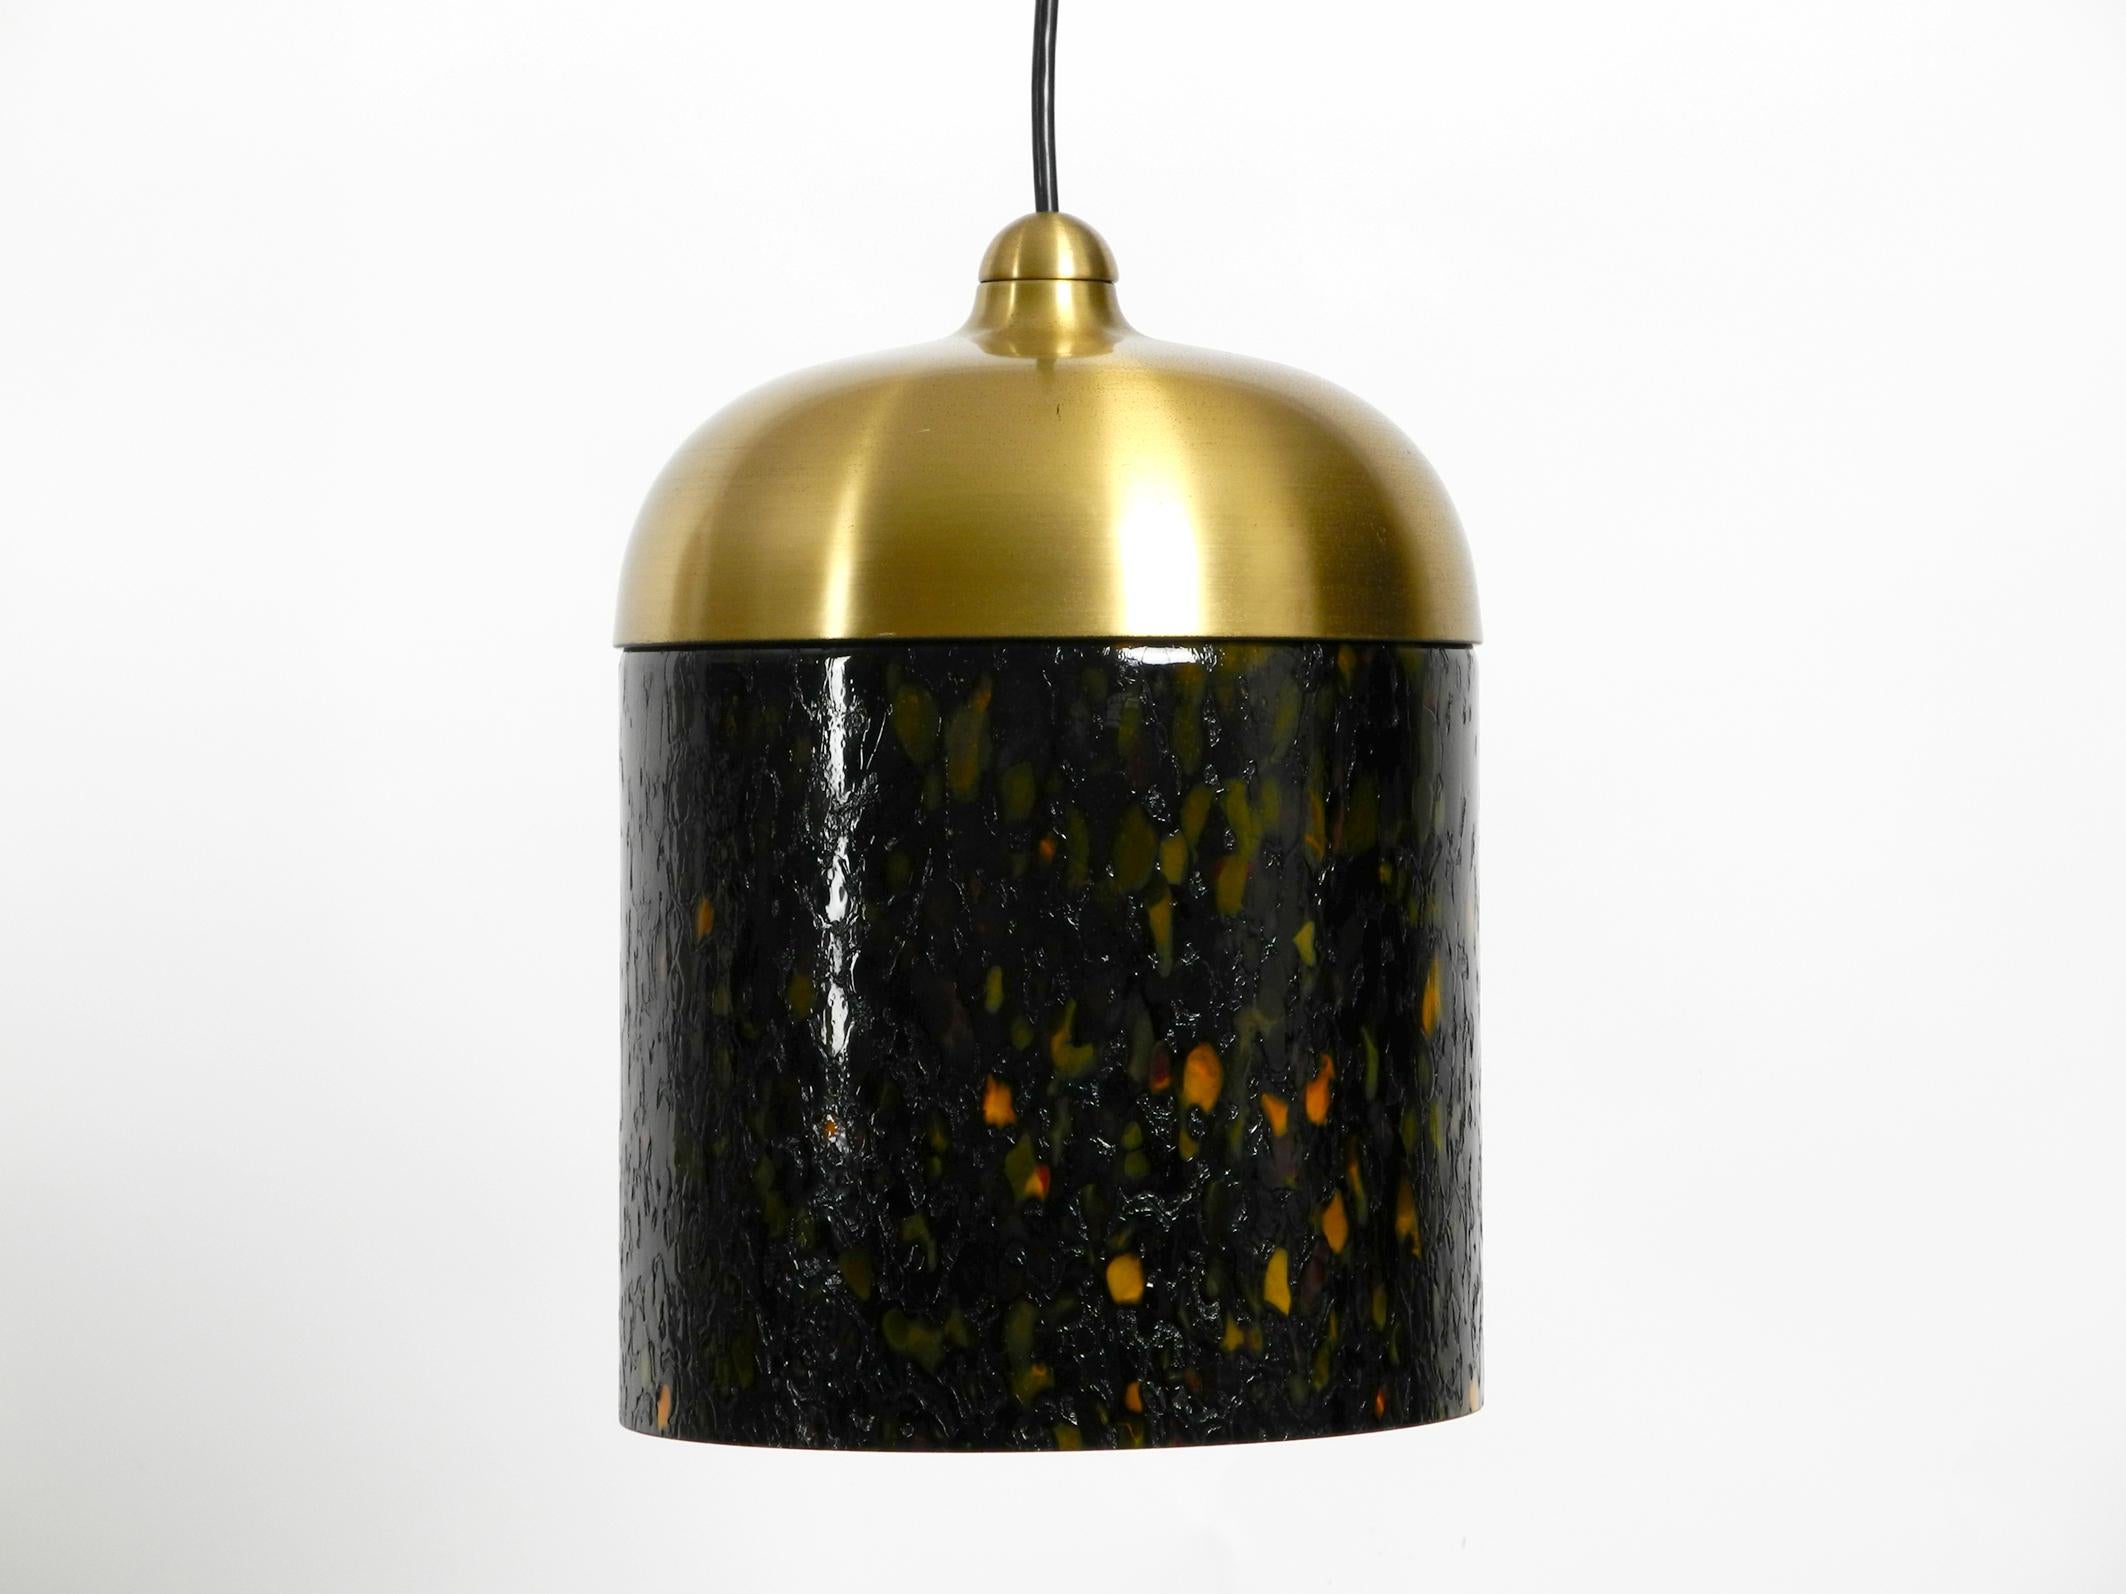 1970s multicolored coated Putzler glass pendant lamp.
Very nice minimalistic space age pop art design with very pleasant light 
created through the thick colored glass.
Glass cover is made of gold-colored metal and with original canopy.
No